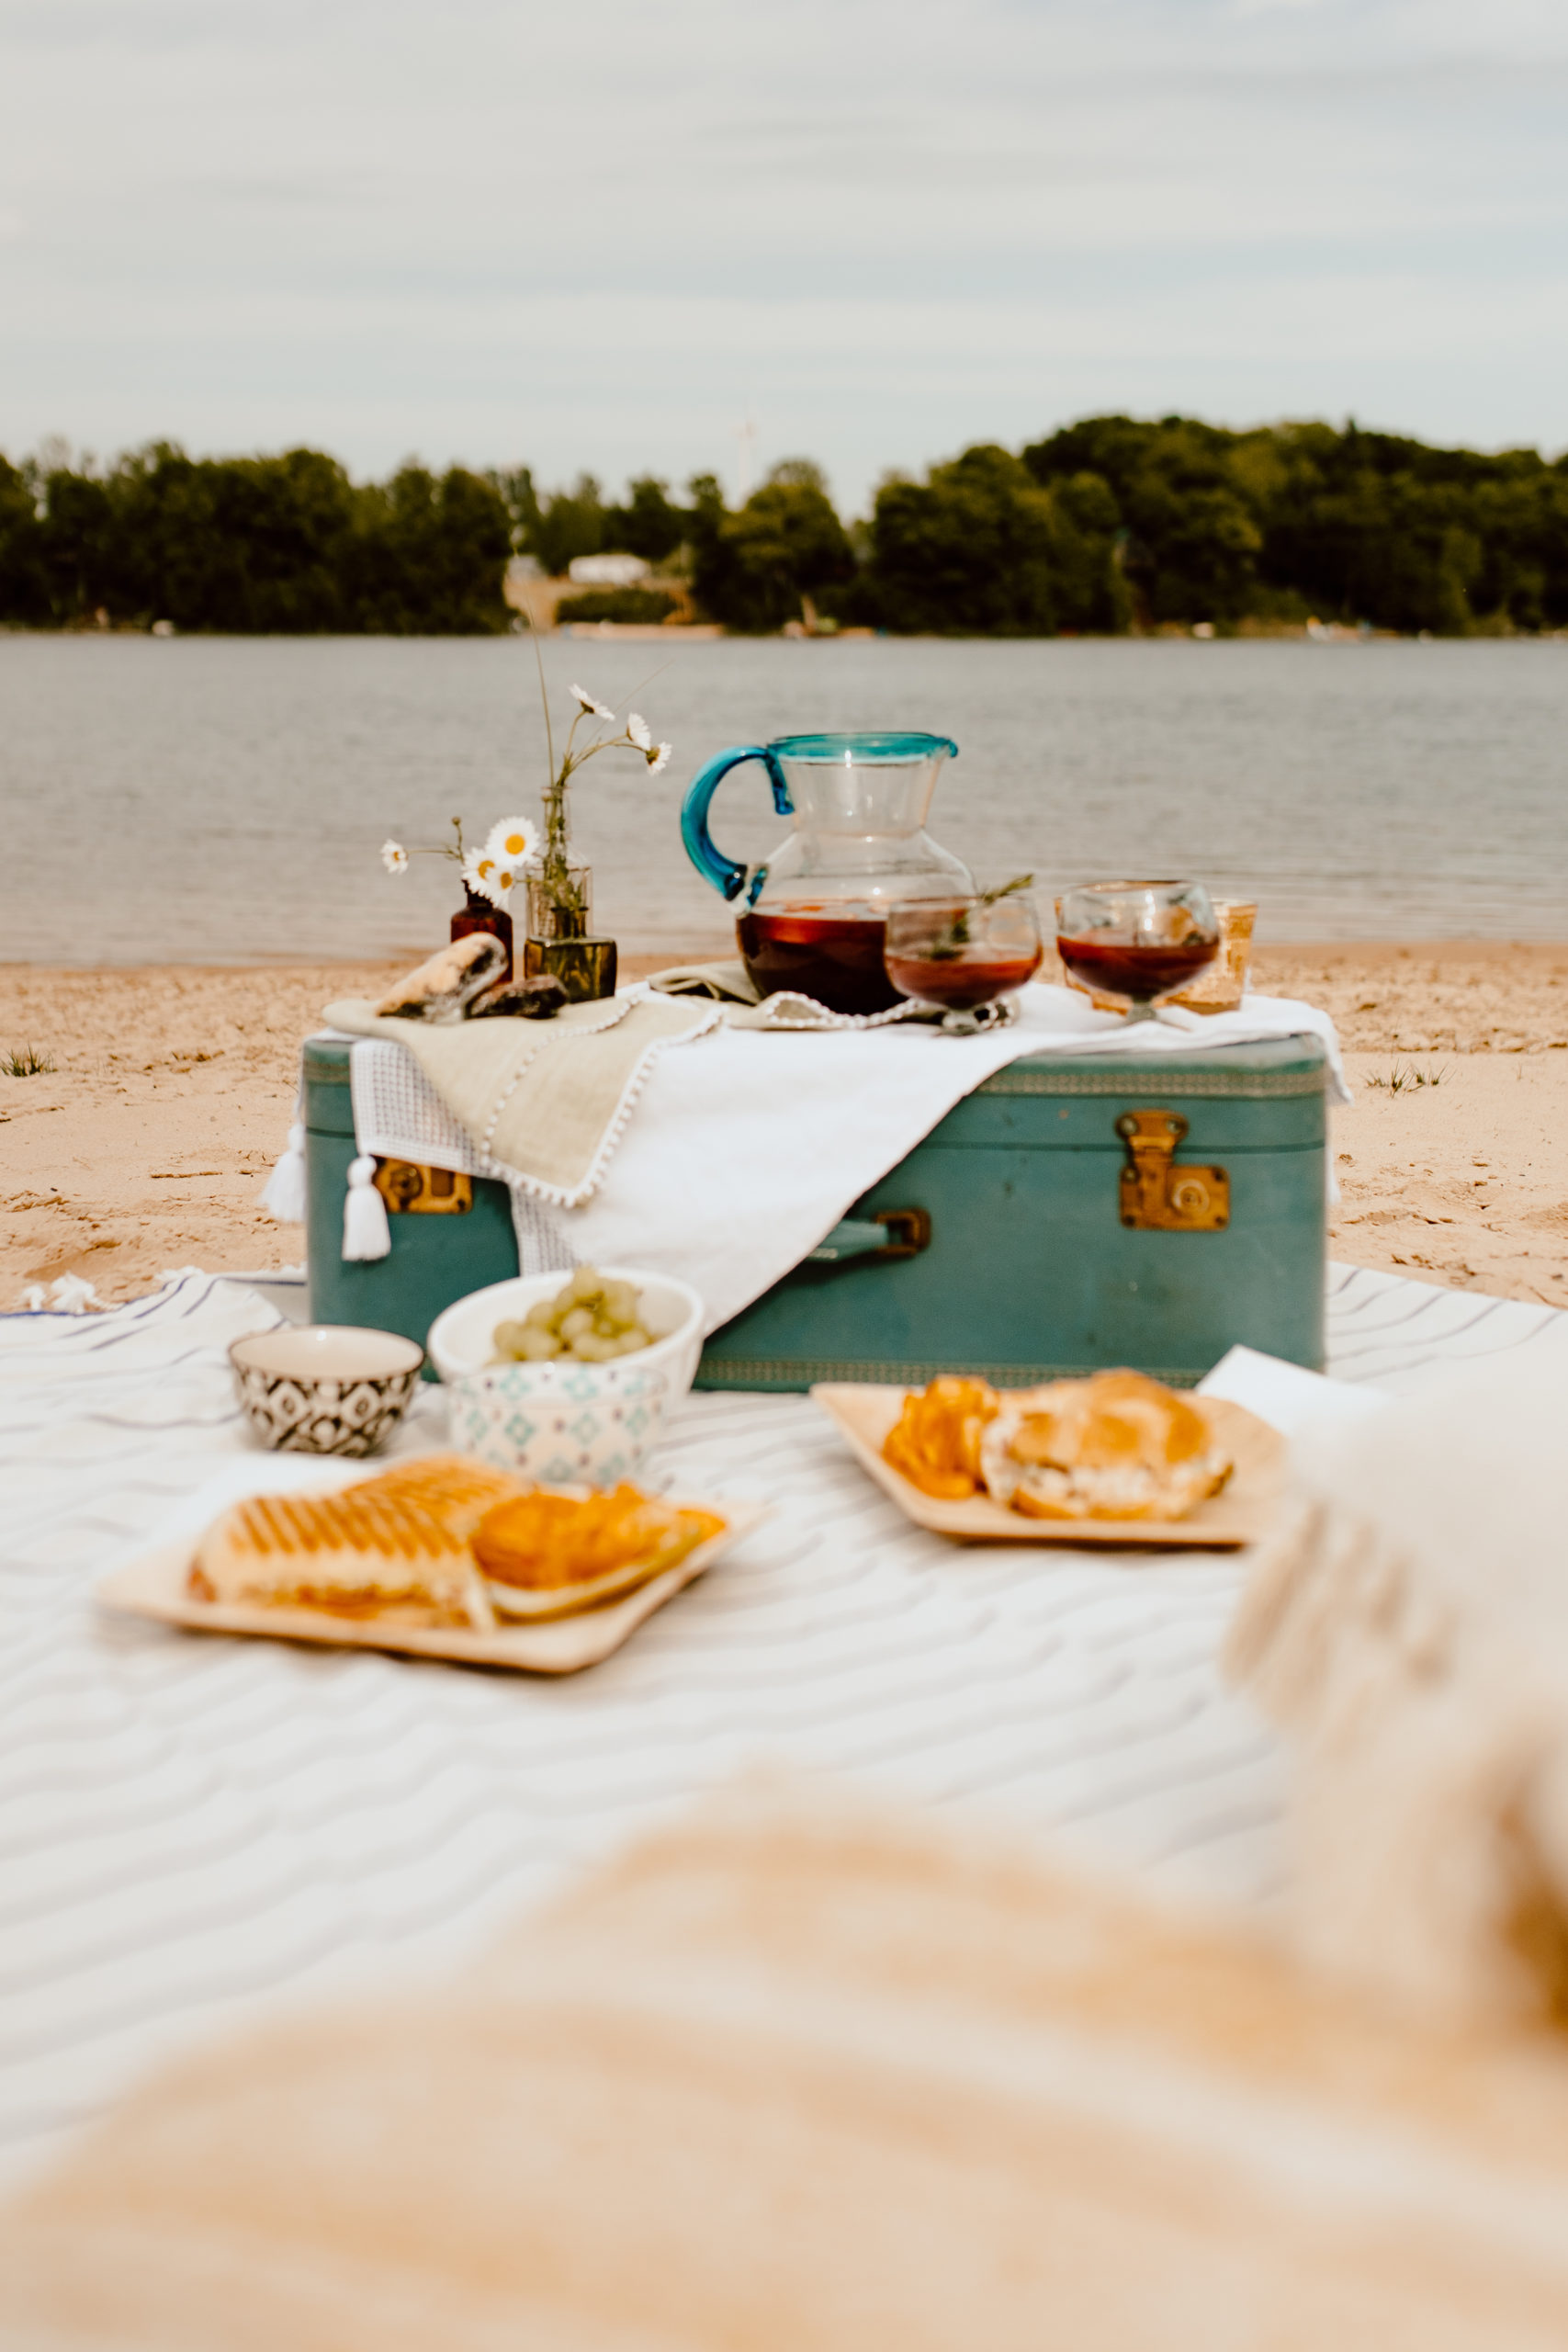 Beach picnic with vintage suitcase as a table. Sangria and sandwiches for food and comfy cushions for relaxing